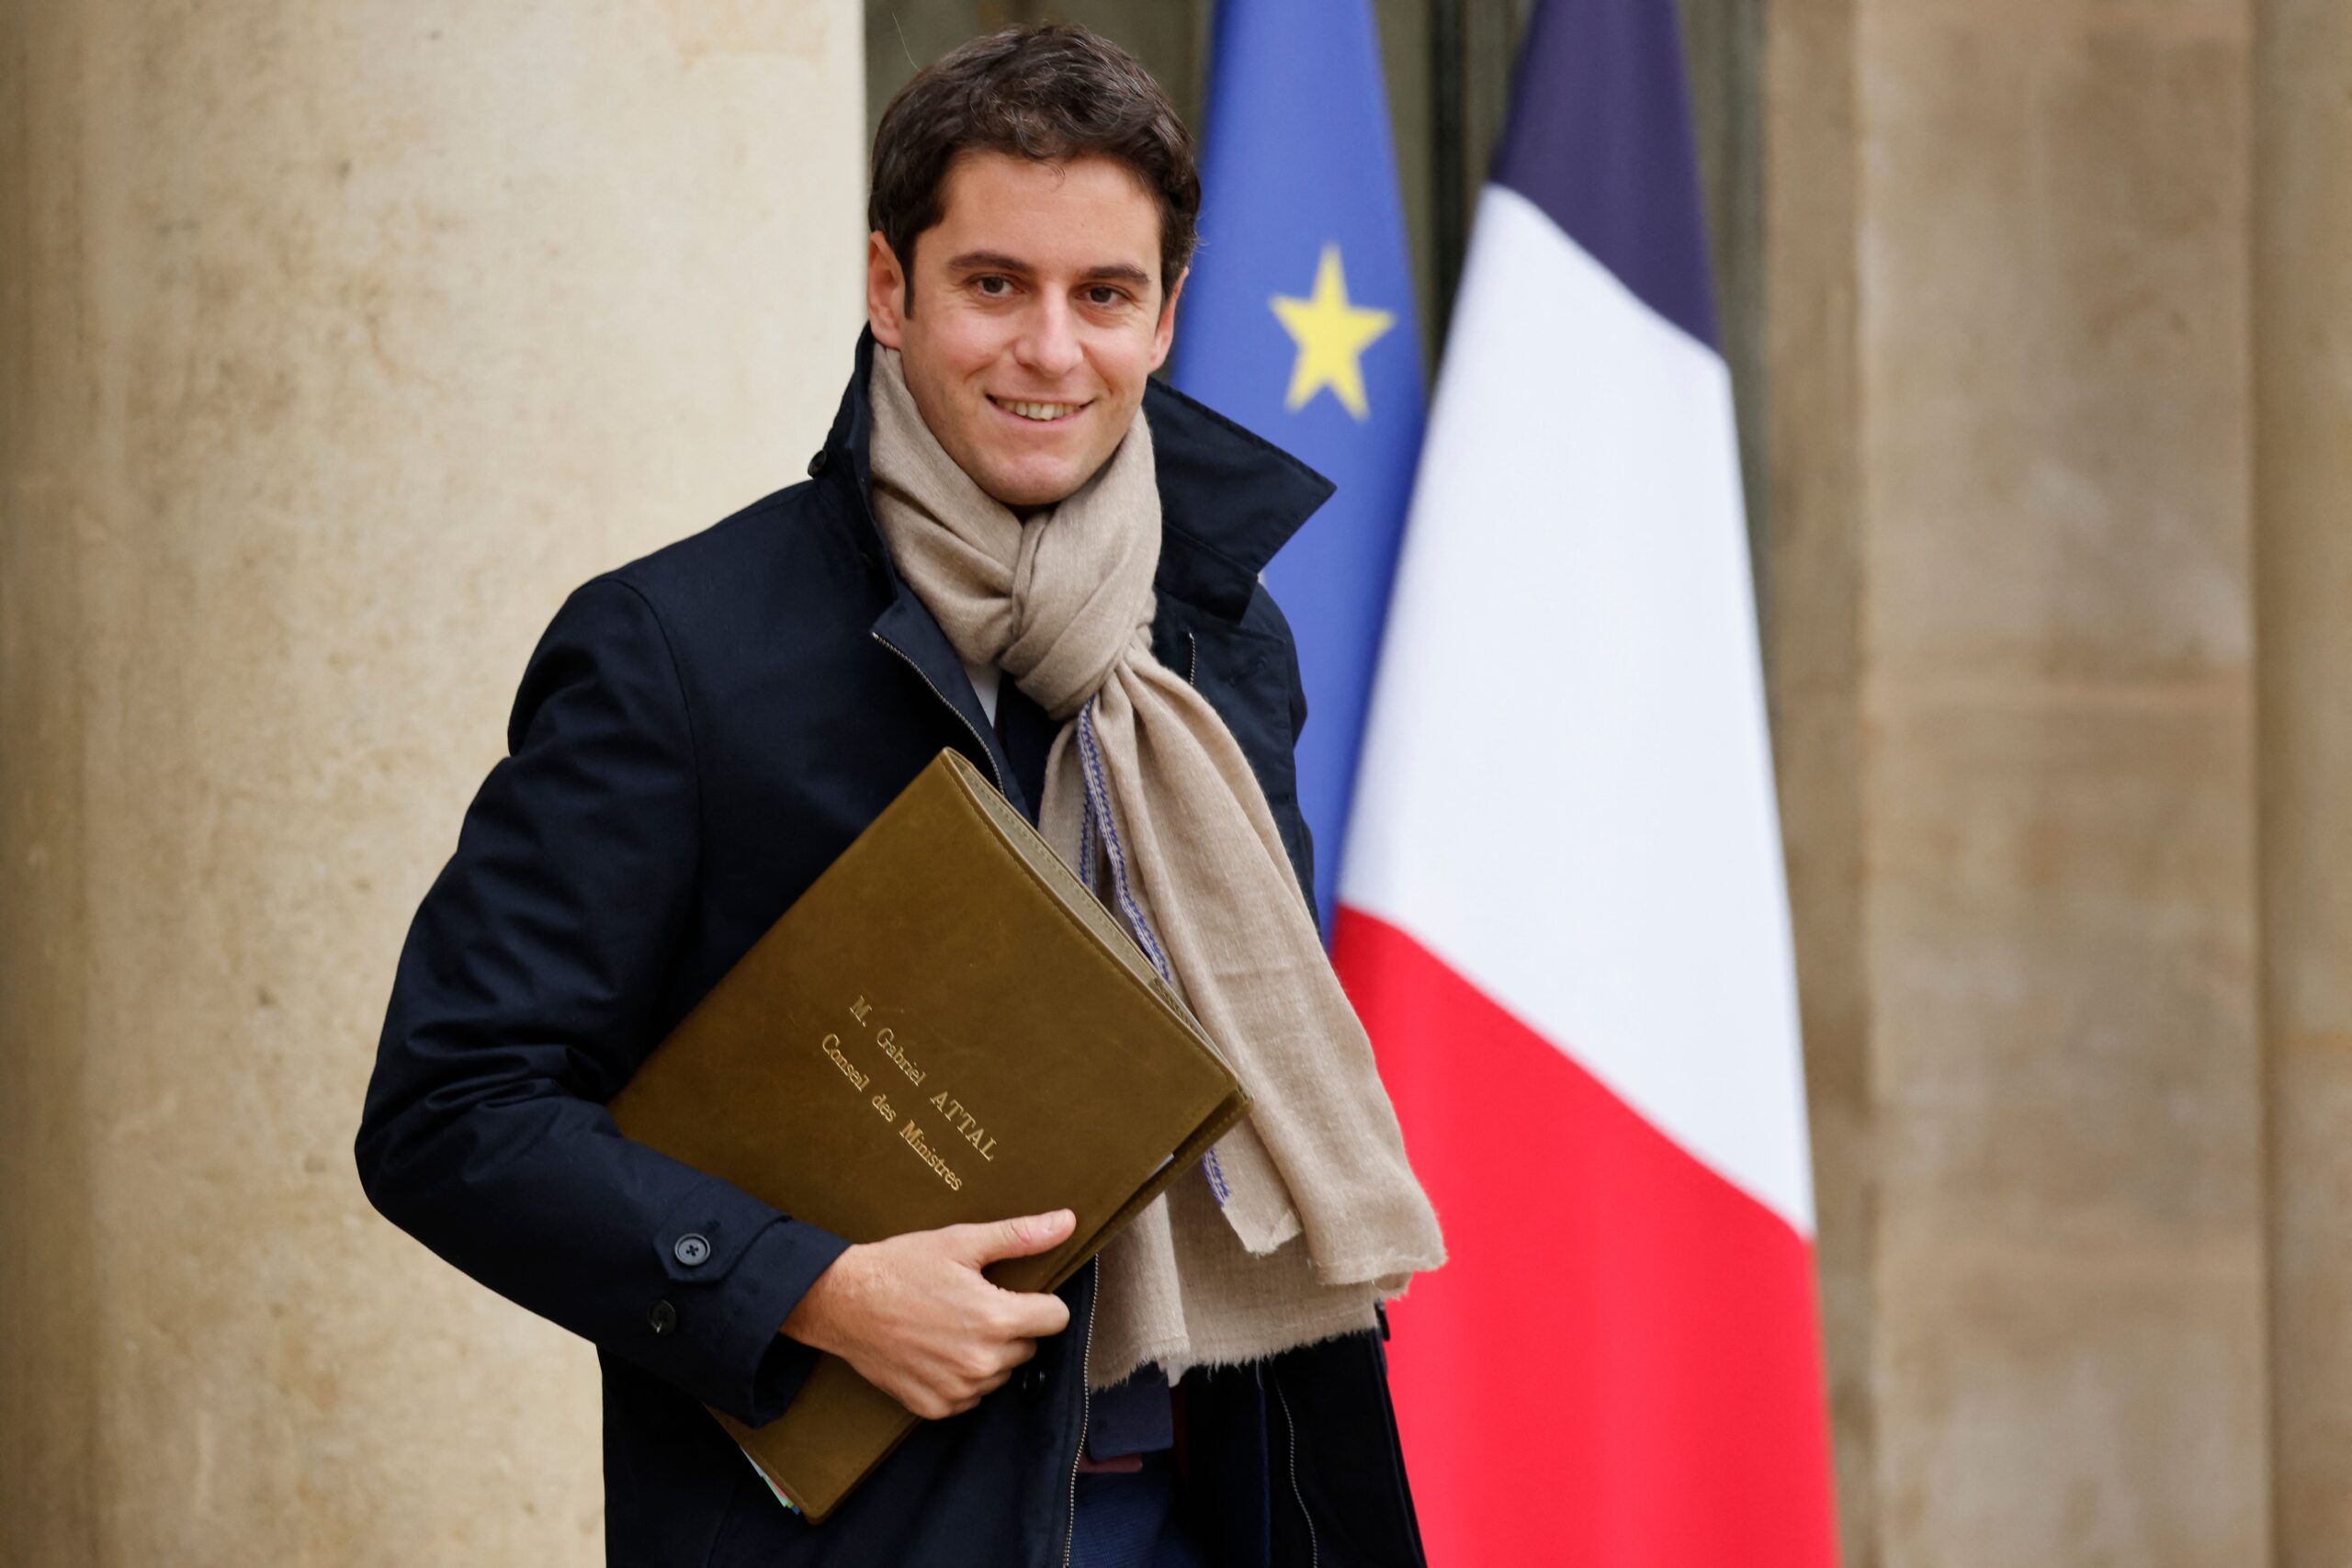 Gabriel Attal New France PM: Who is he? Check Now - SSC Govt Job